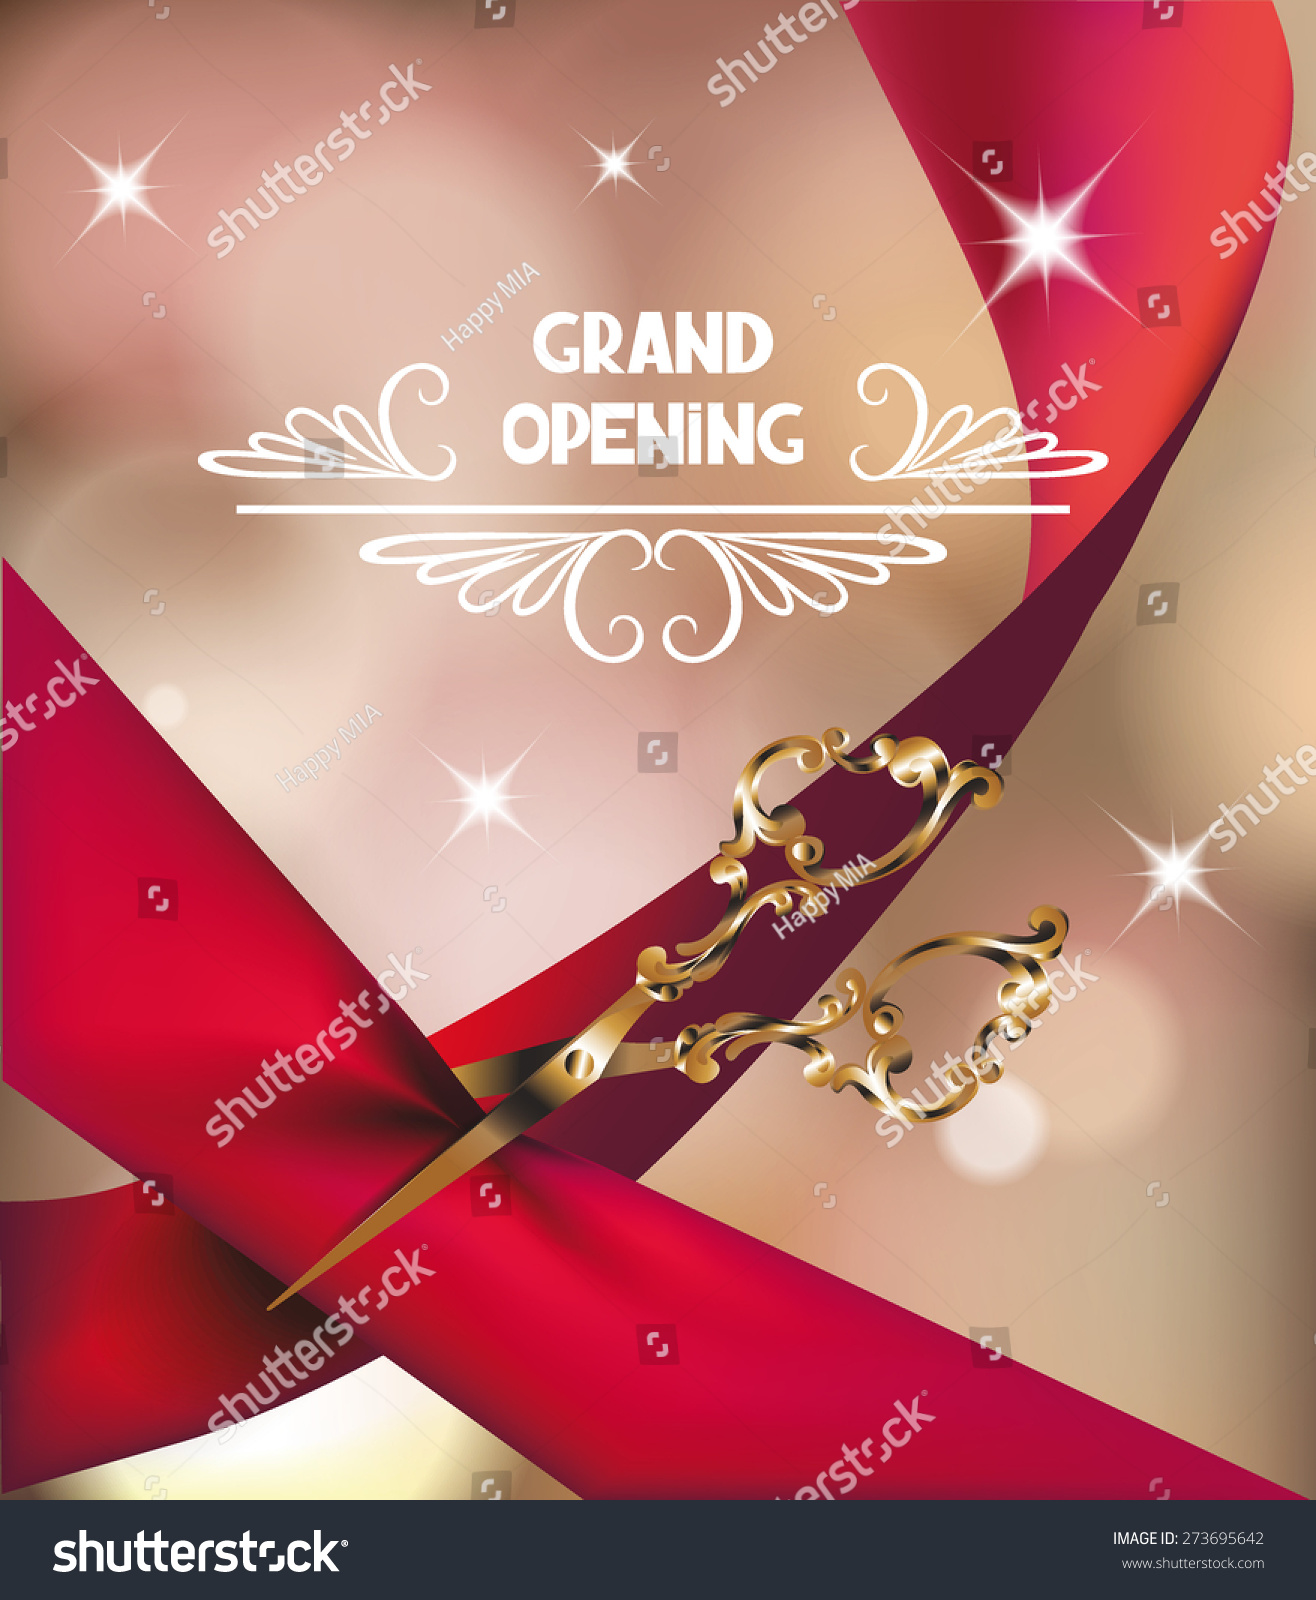 Grand Opening Invitation Card Template